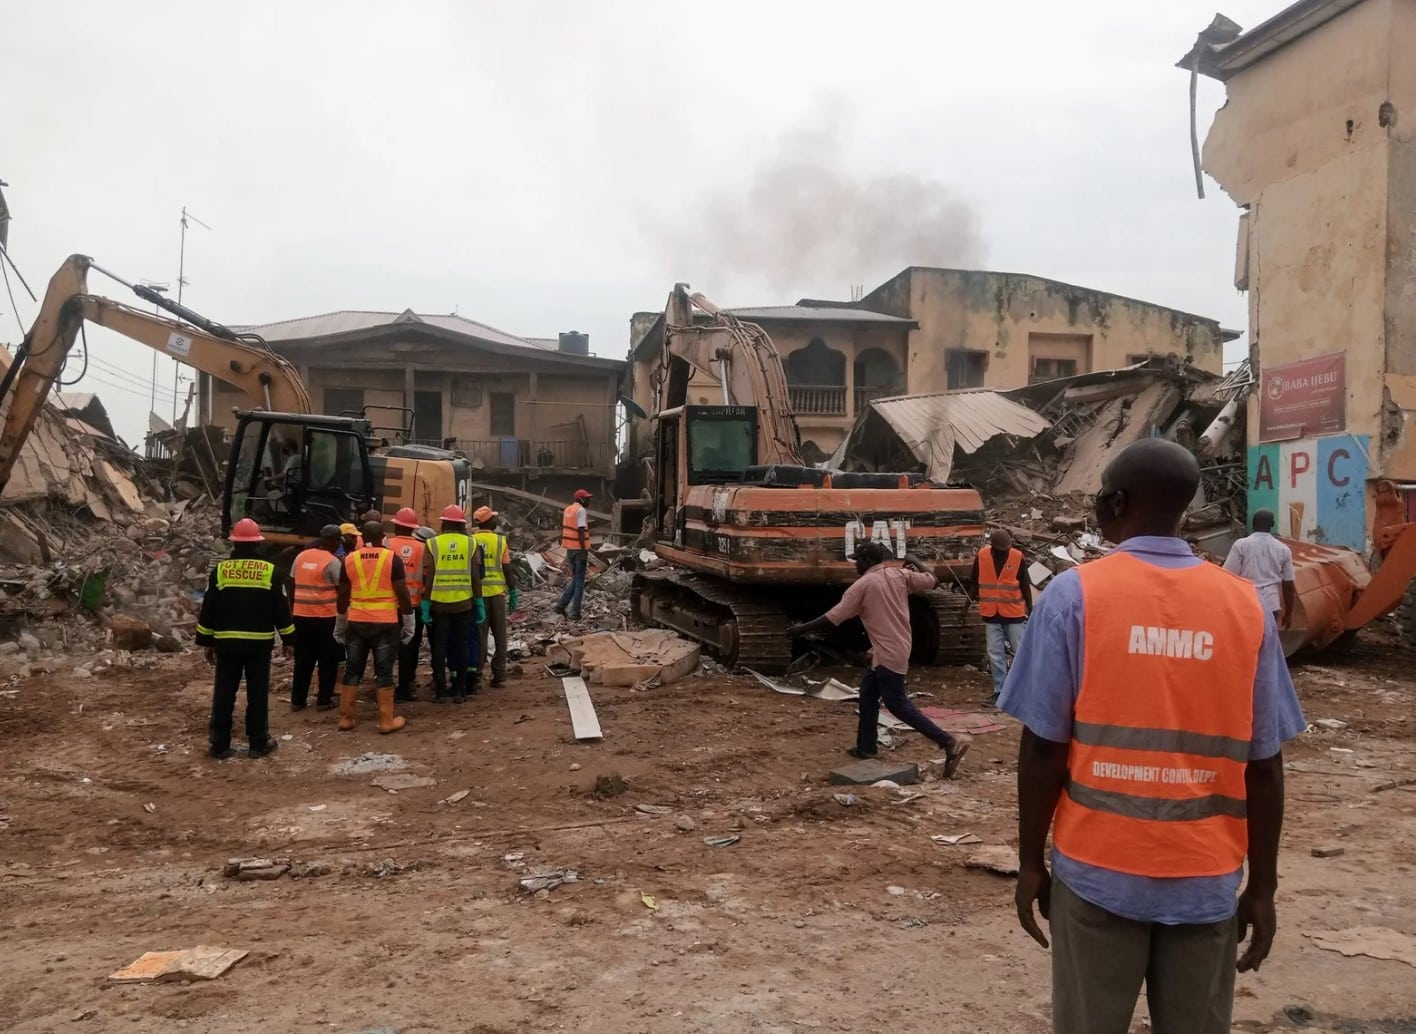 Wike orders arrest of landlord over Abuja building collapse